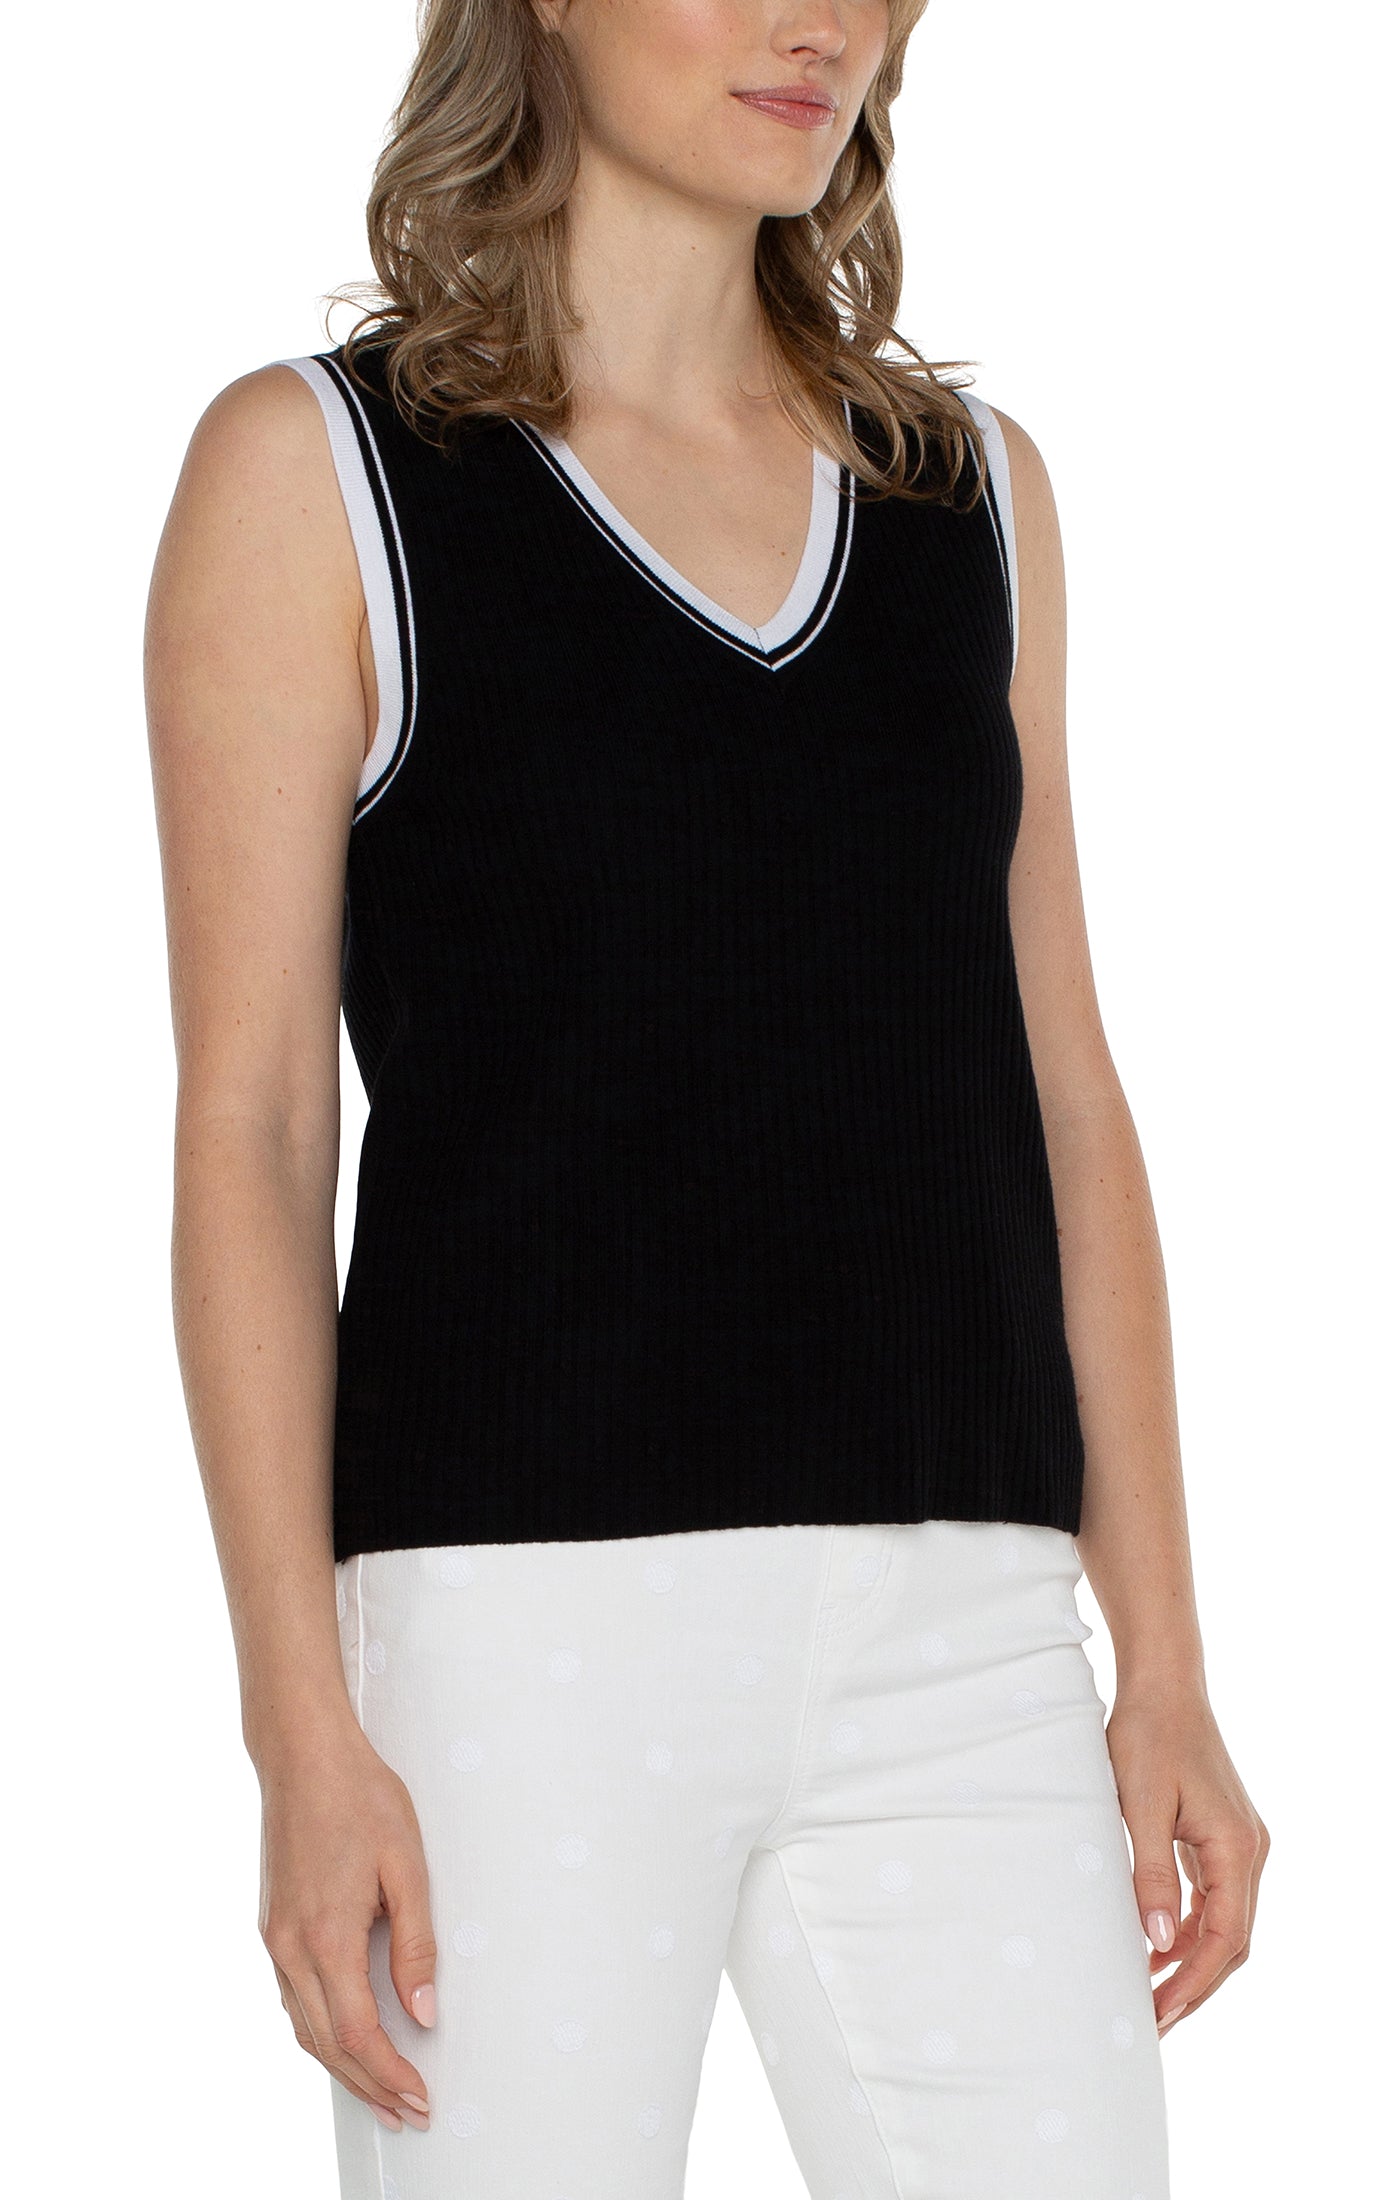 Liverpool Sleeveless V-Neck Sweater with Novelty Rib Trim (black and white contrast)